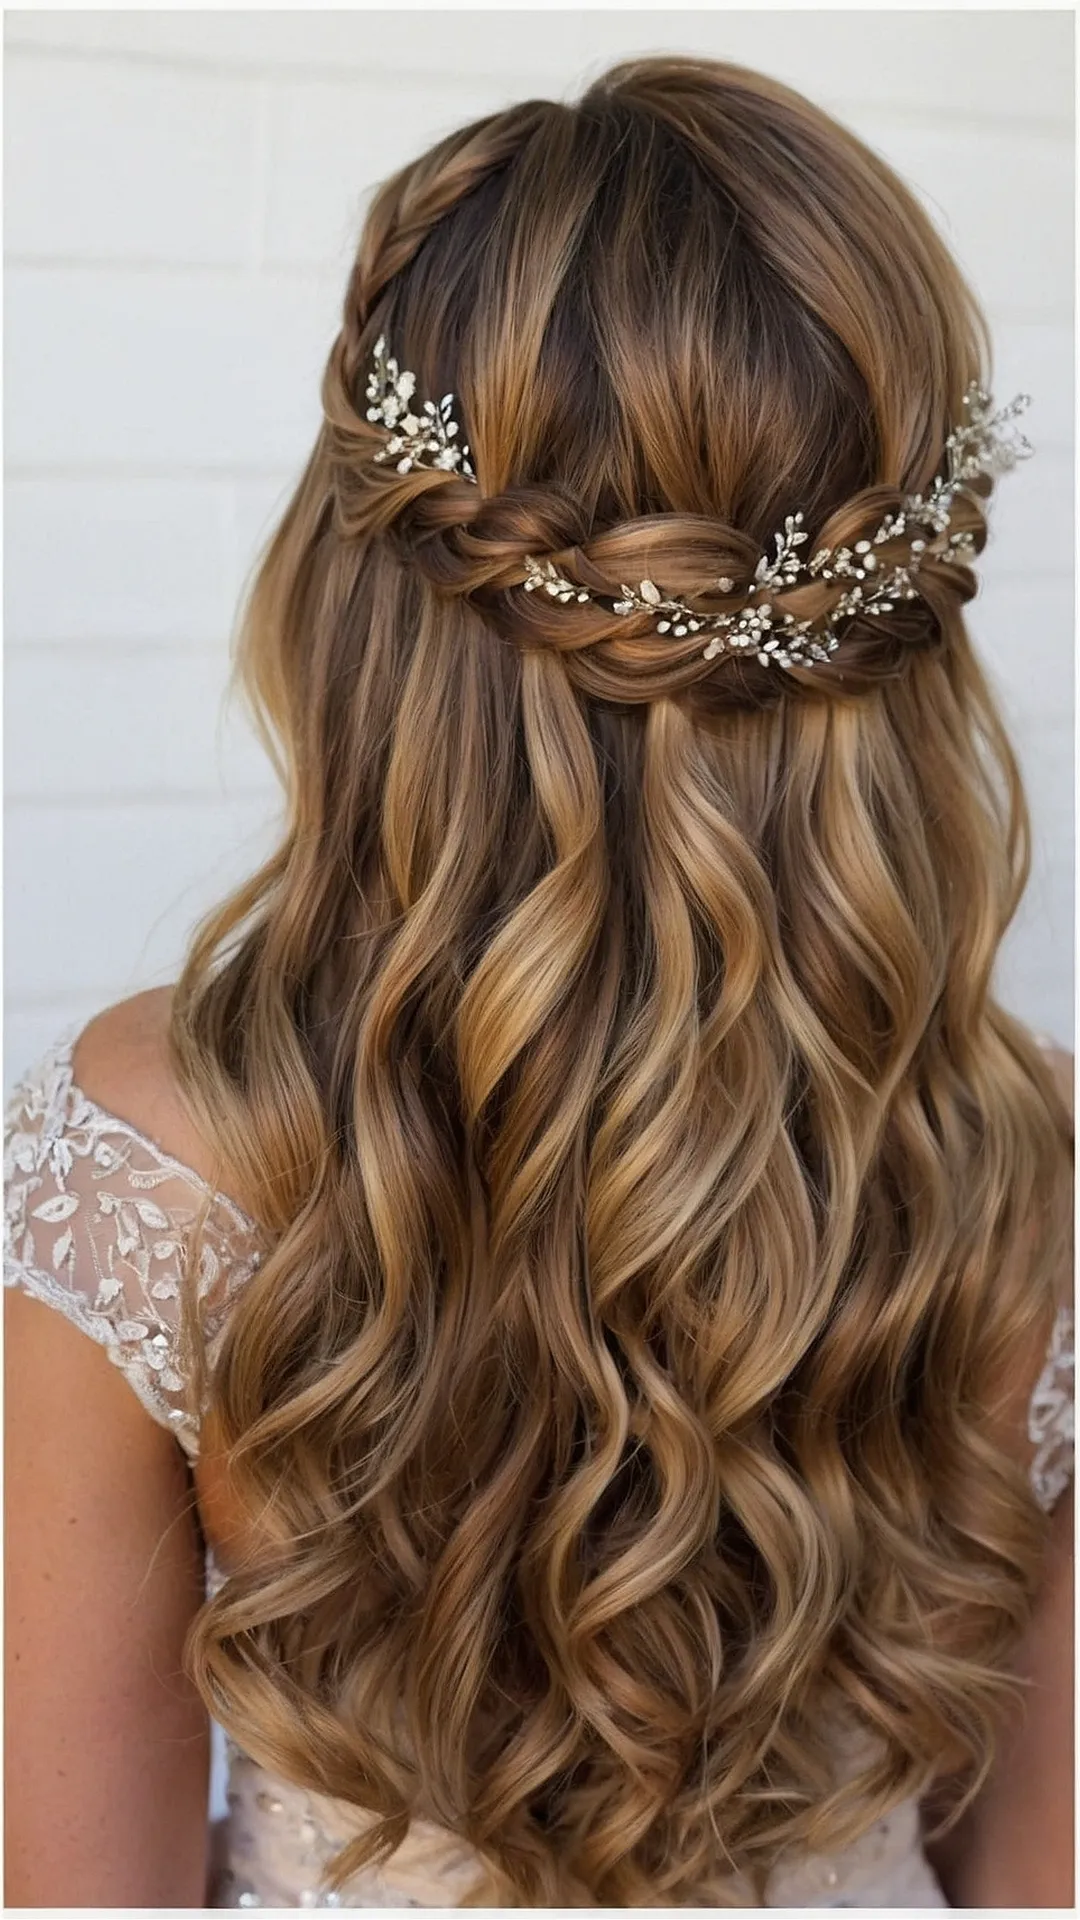 Elegant Bun Ideas for a Picture-Perfect Prom Look